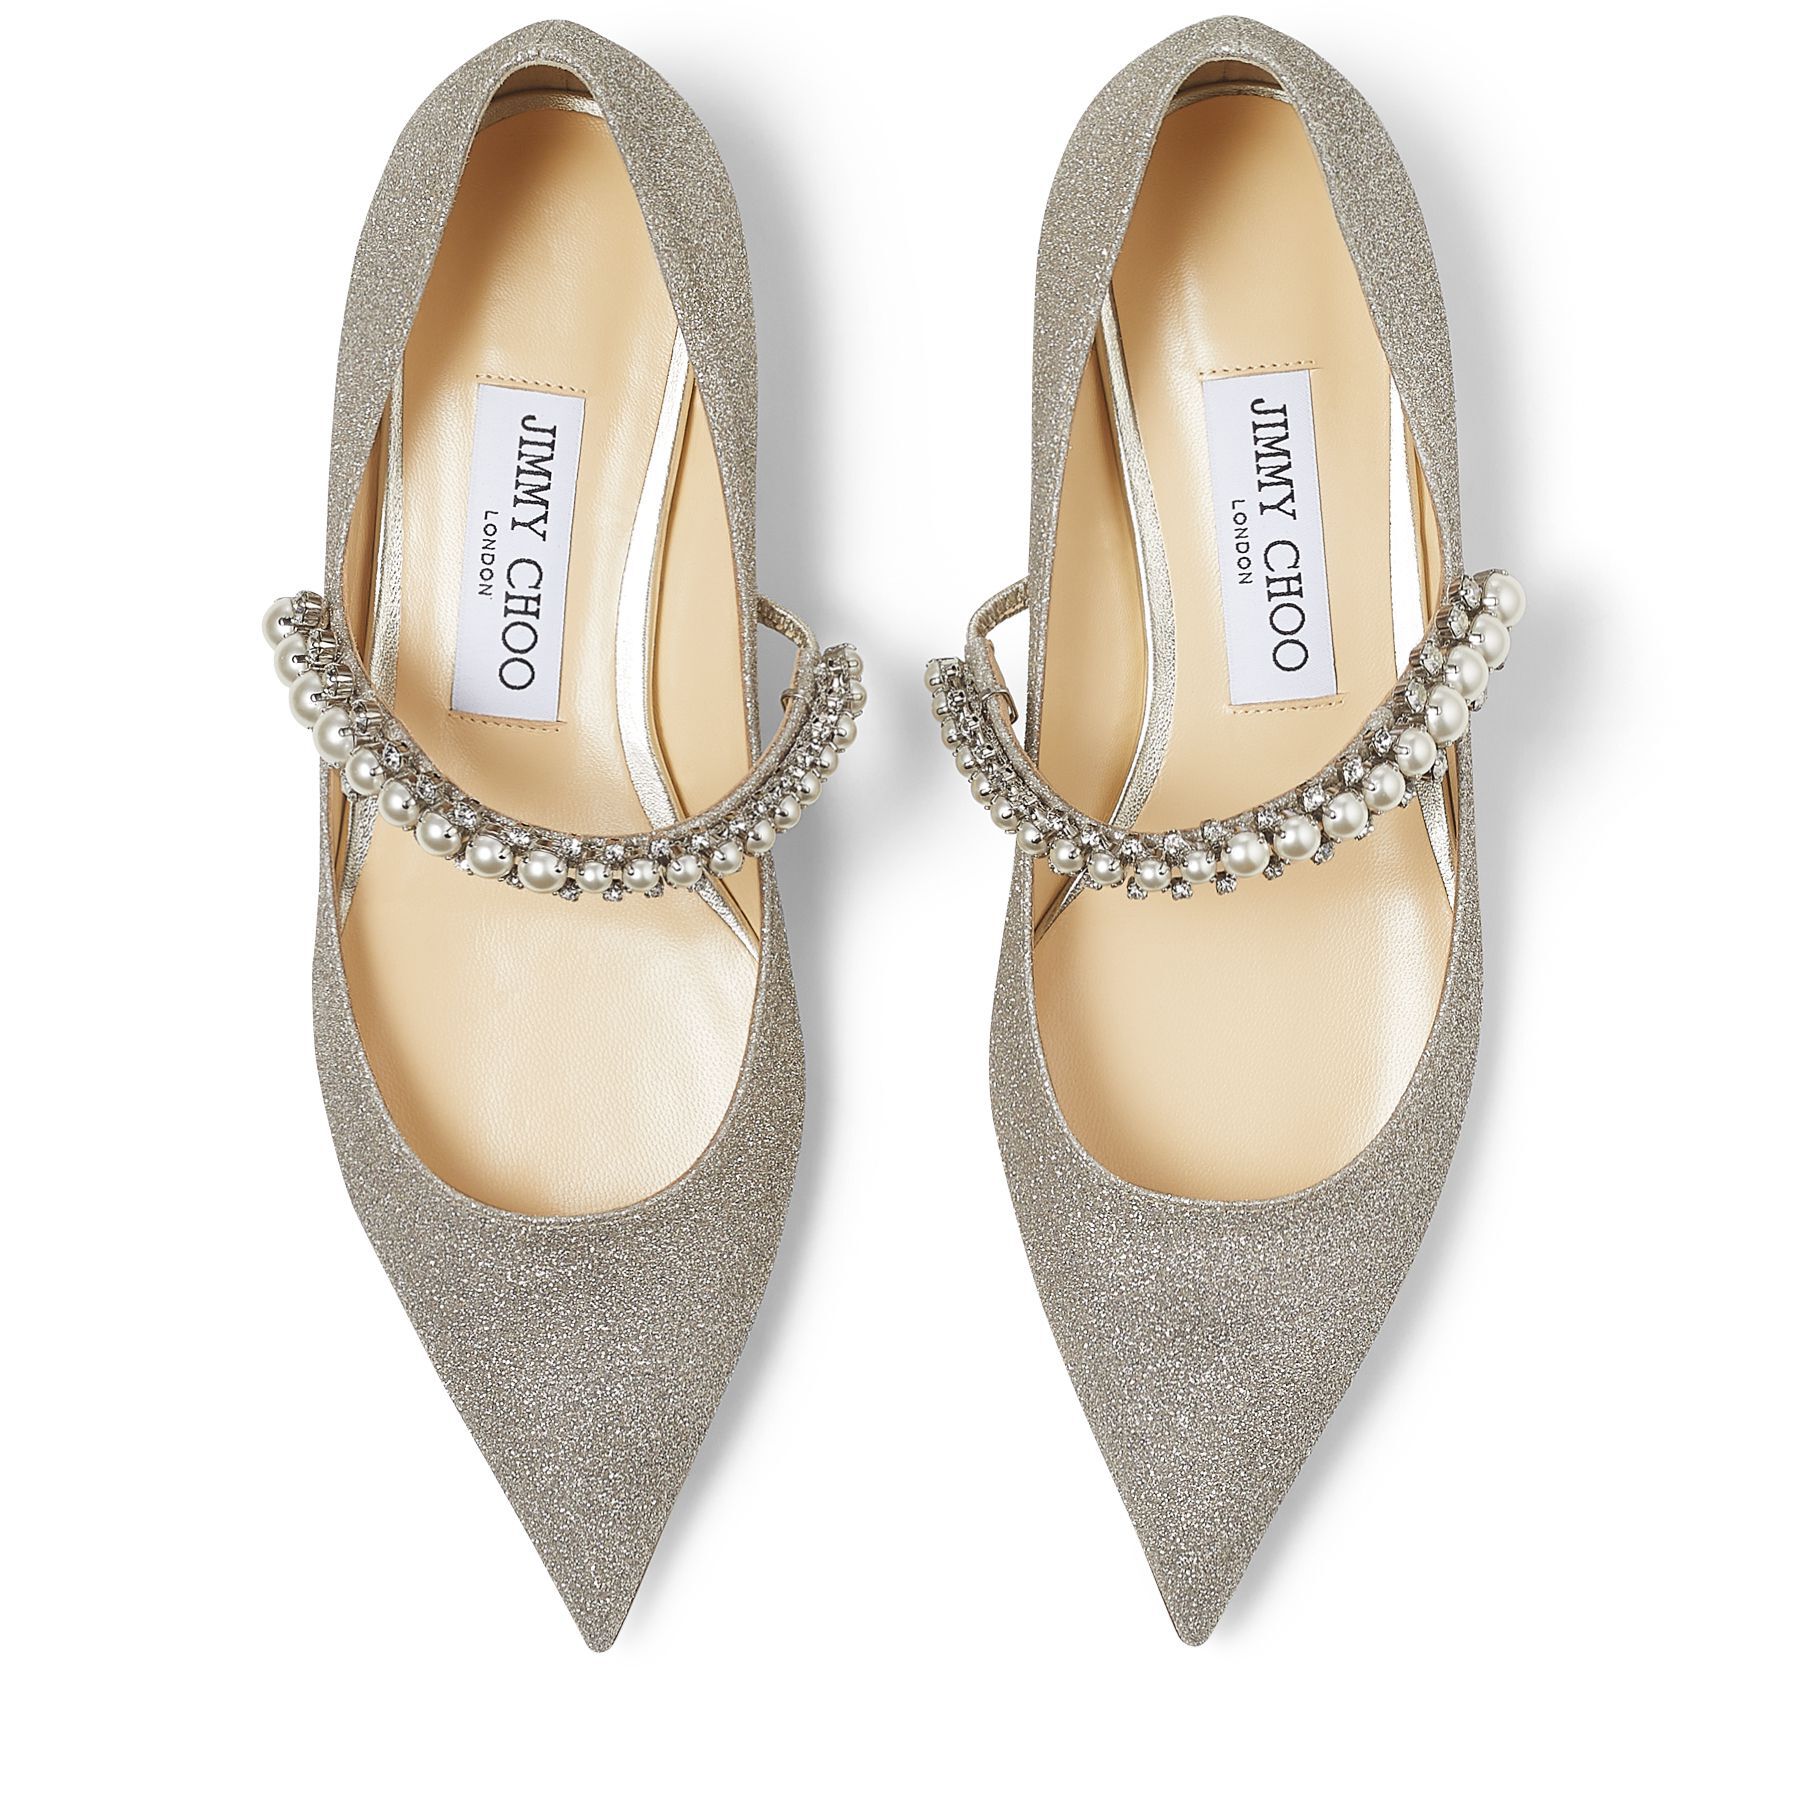 Platinum Ice Dusty Glitter Flats with Crystal and Pearl Strap | BAILY ...